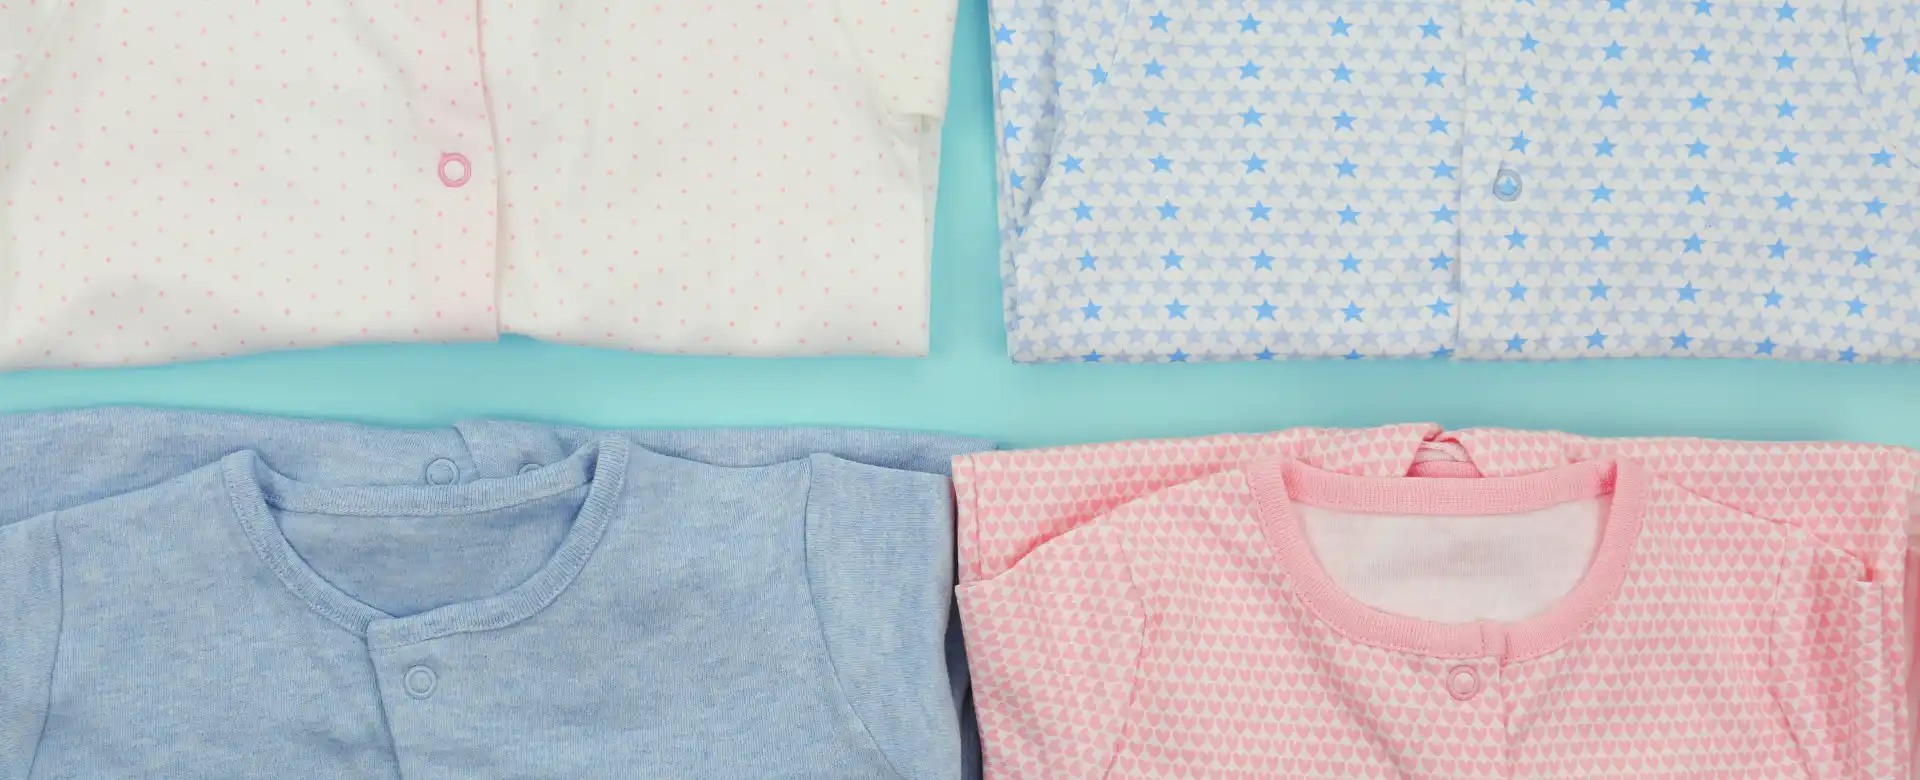 baby clothes to purchase after convincing husband to finding out baby gender